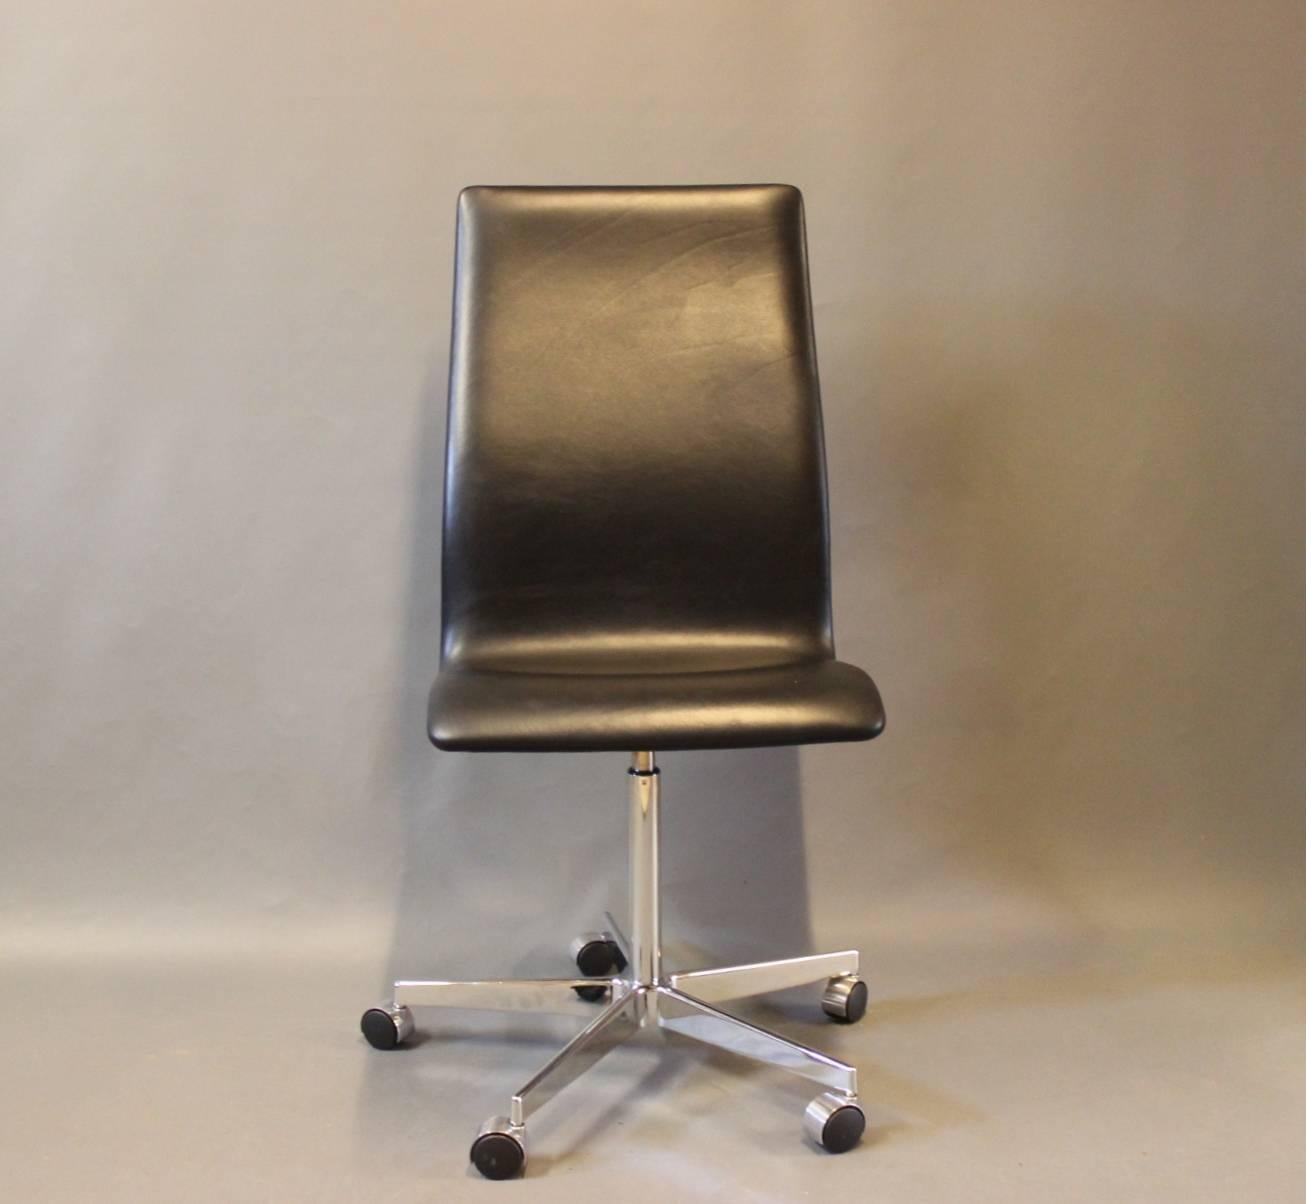 The Oxford classic office chair, model 3193C, in black elegance leather designed by Arne Jacobsen in 1963 and manufactured by Fritz Hansen. The chair is with original upholstery.